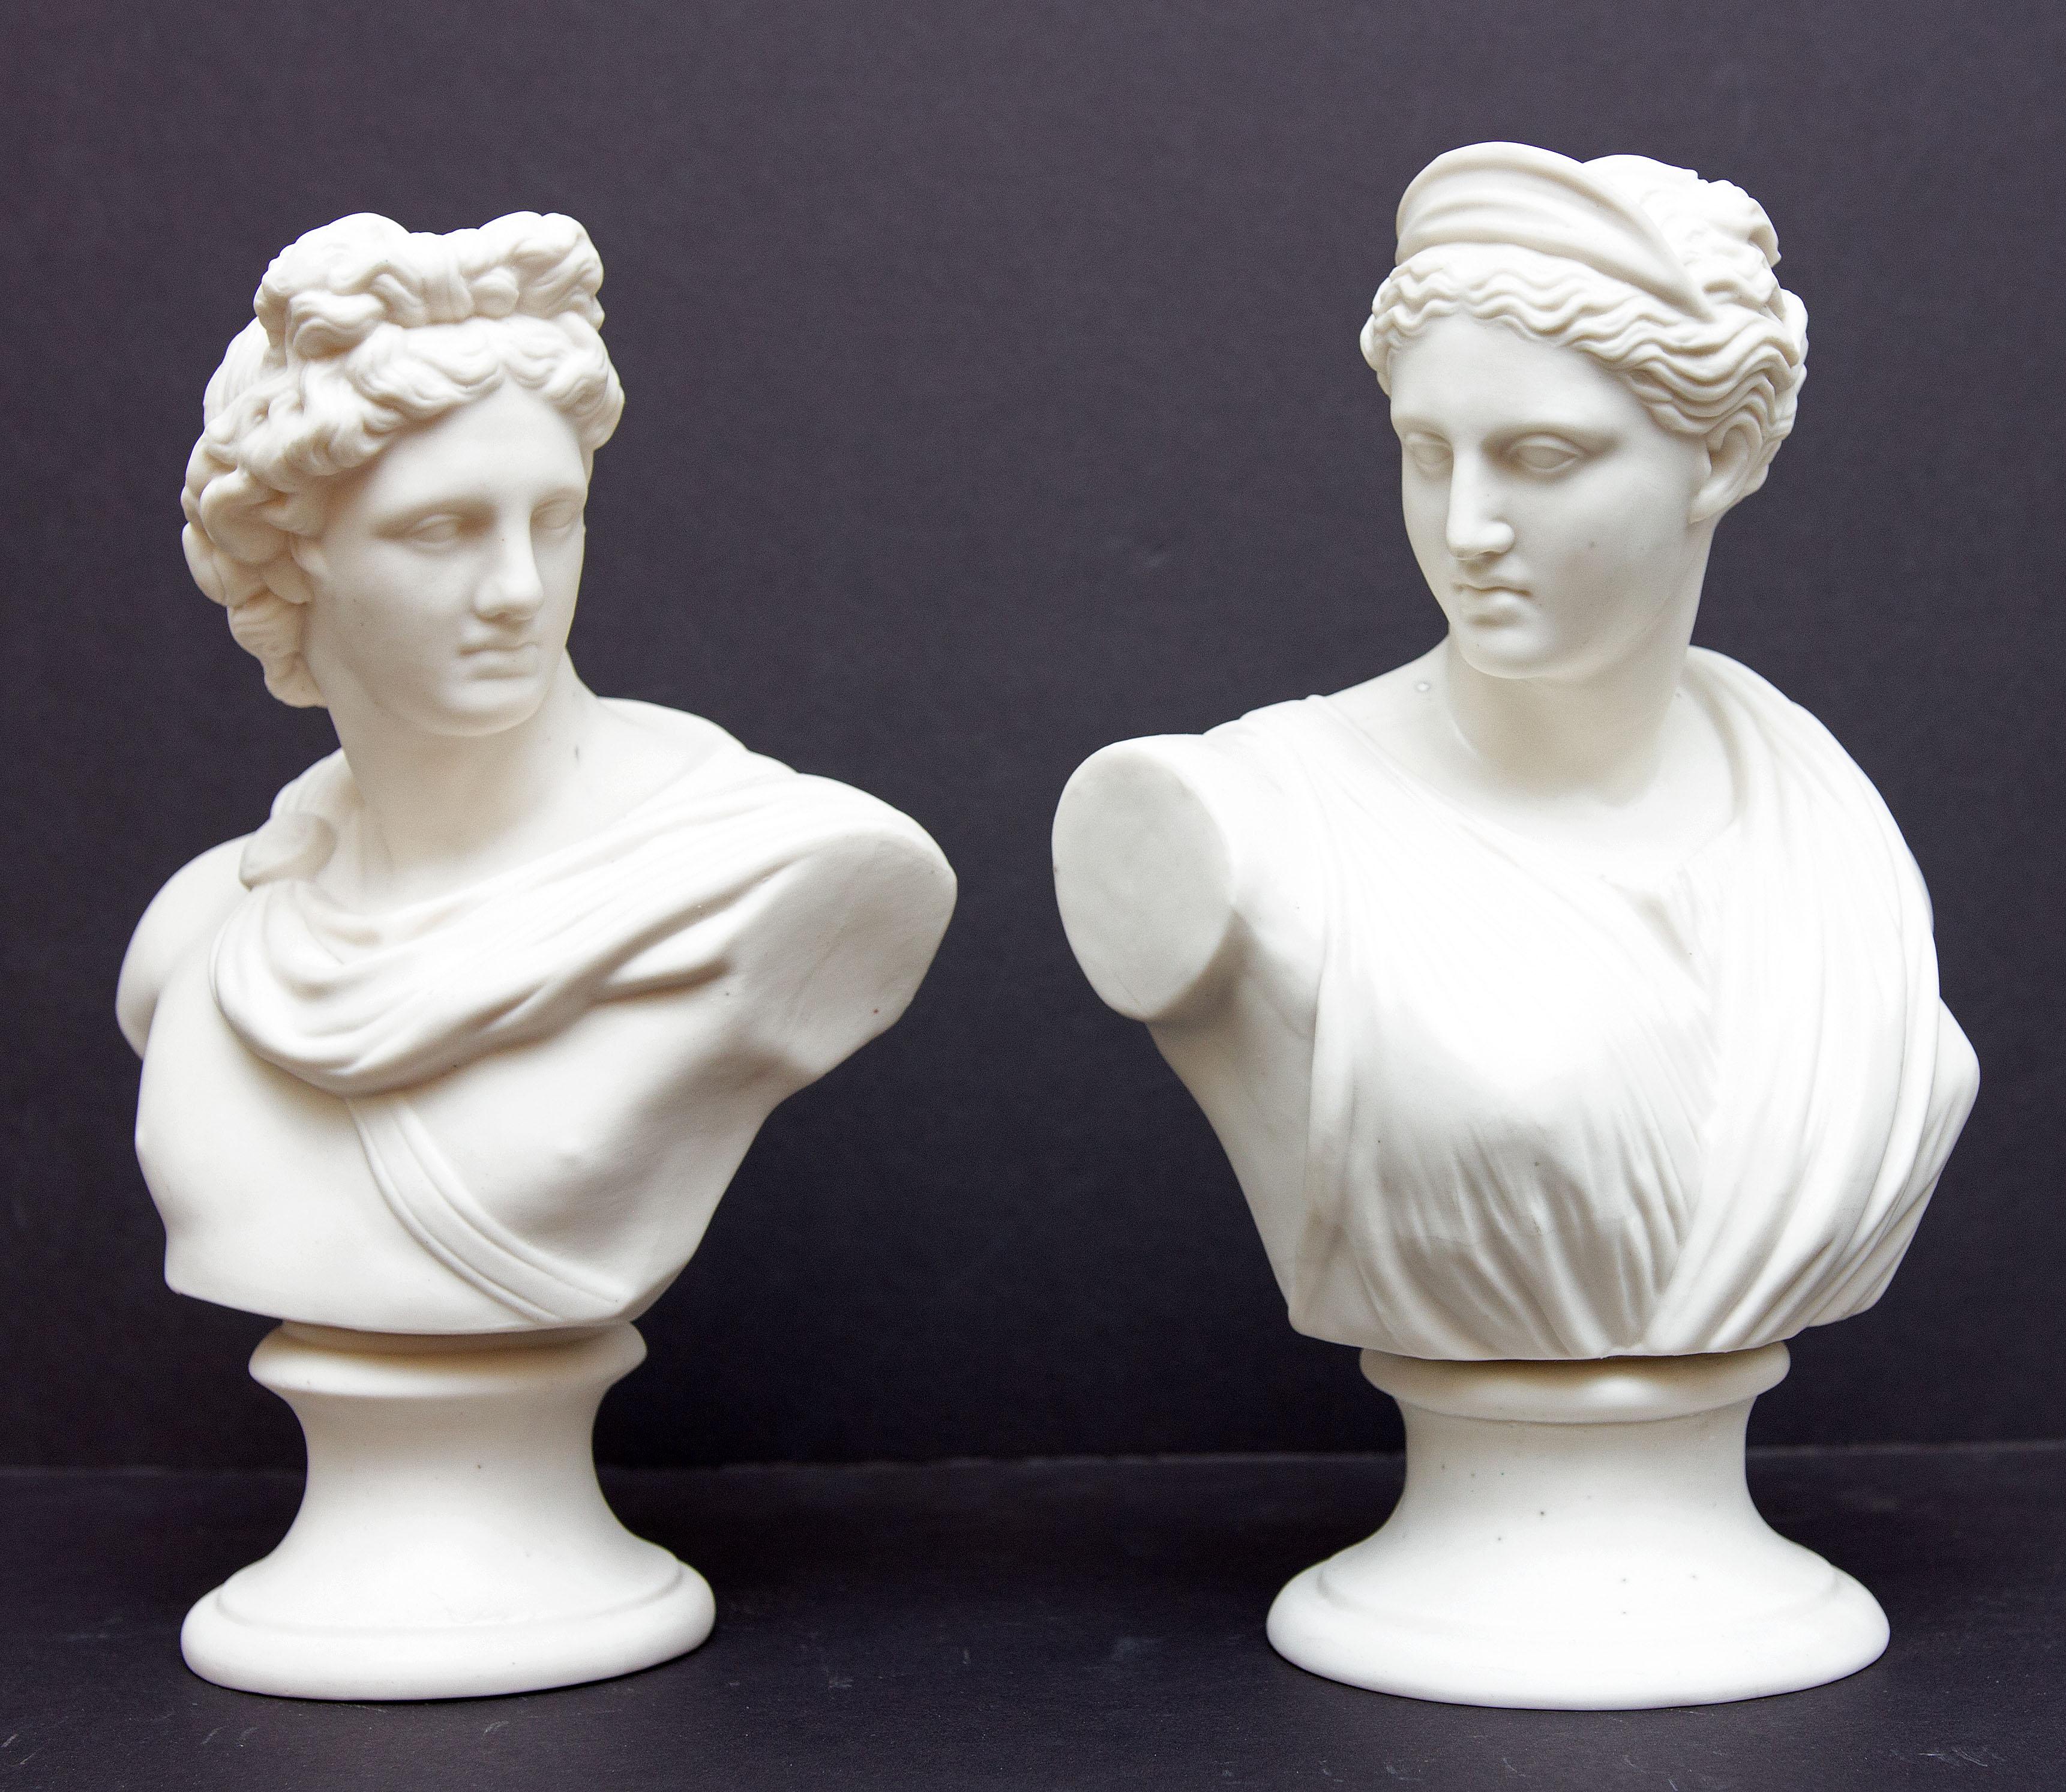 Pair of classical busts. Apollo and Diana. Parian bisque. Early 20th century.